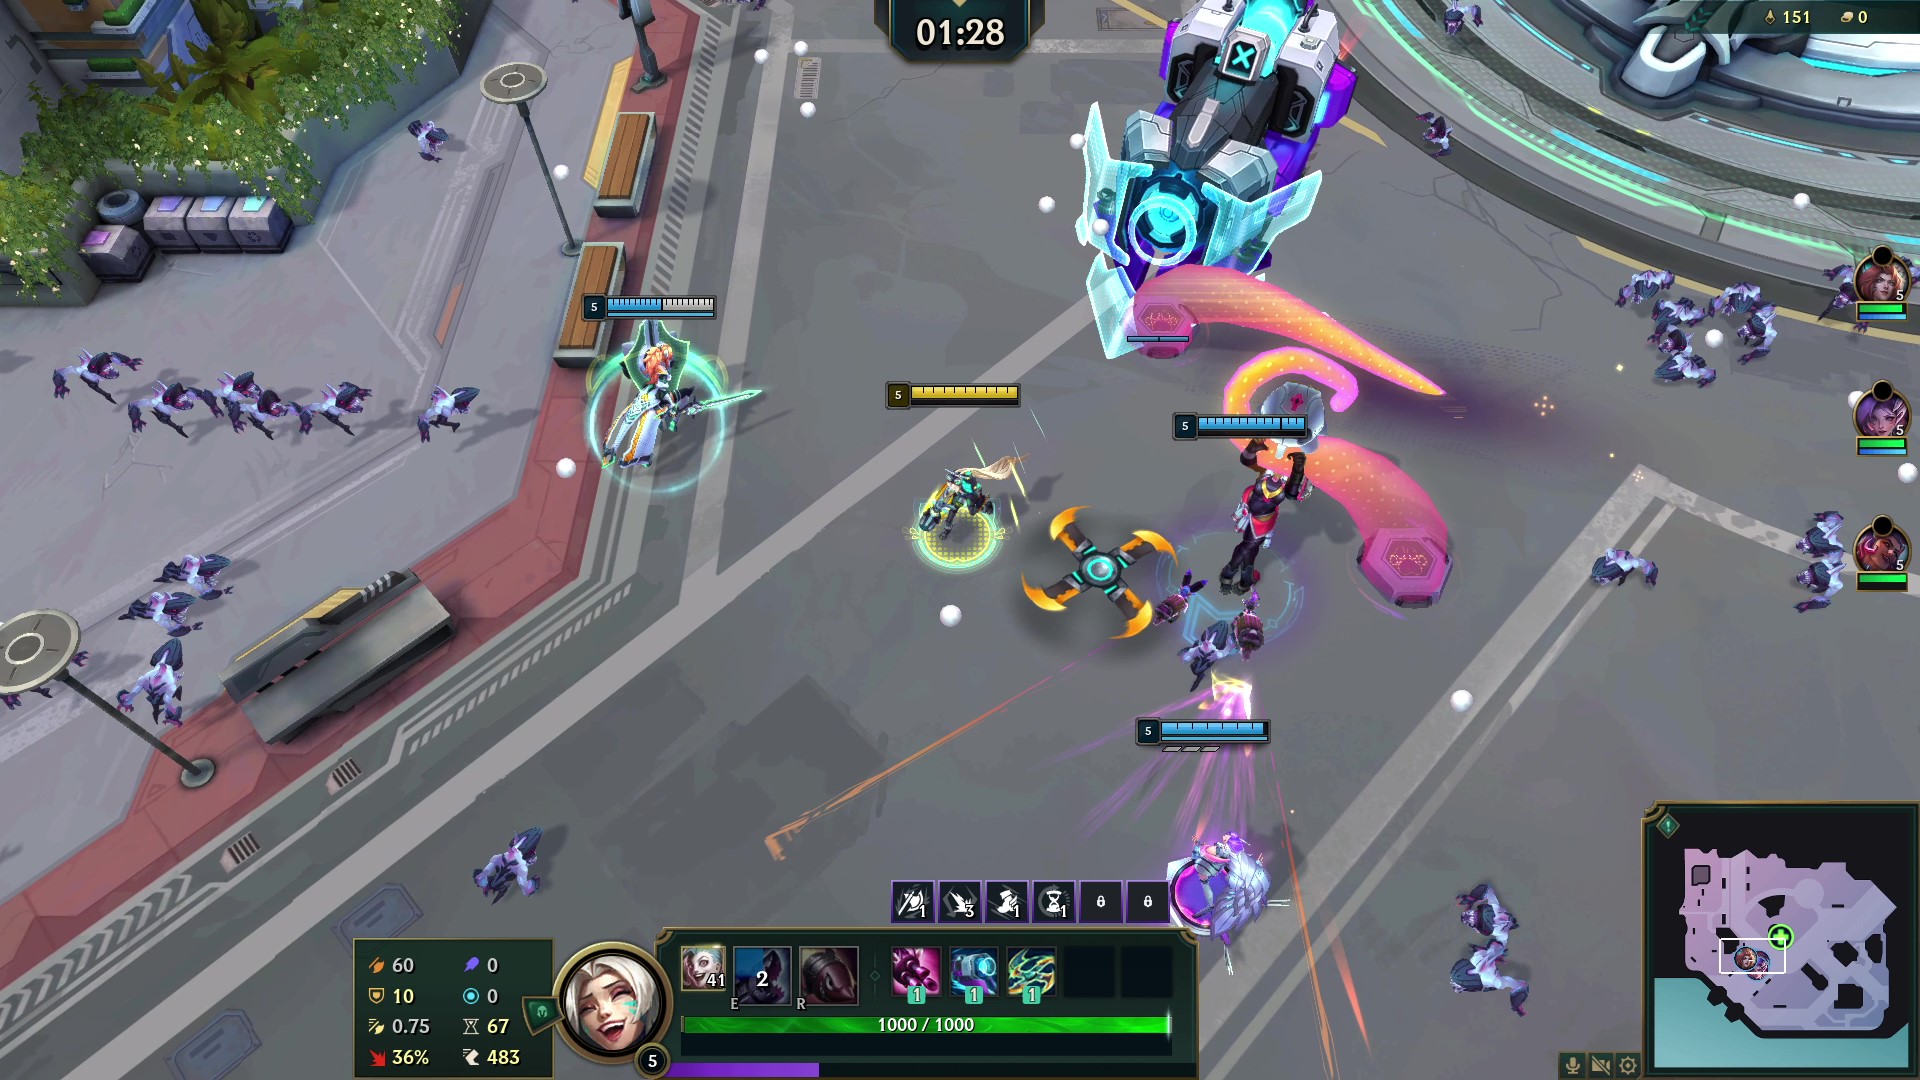 Gameplay from League of Legends' Swarm mode, showing a team of players battling foes in an urban map.